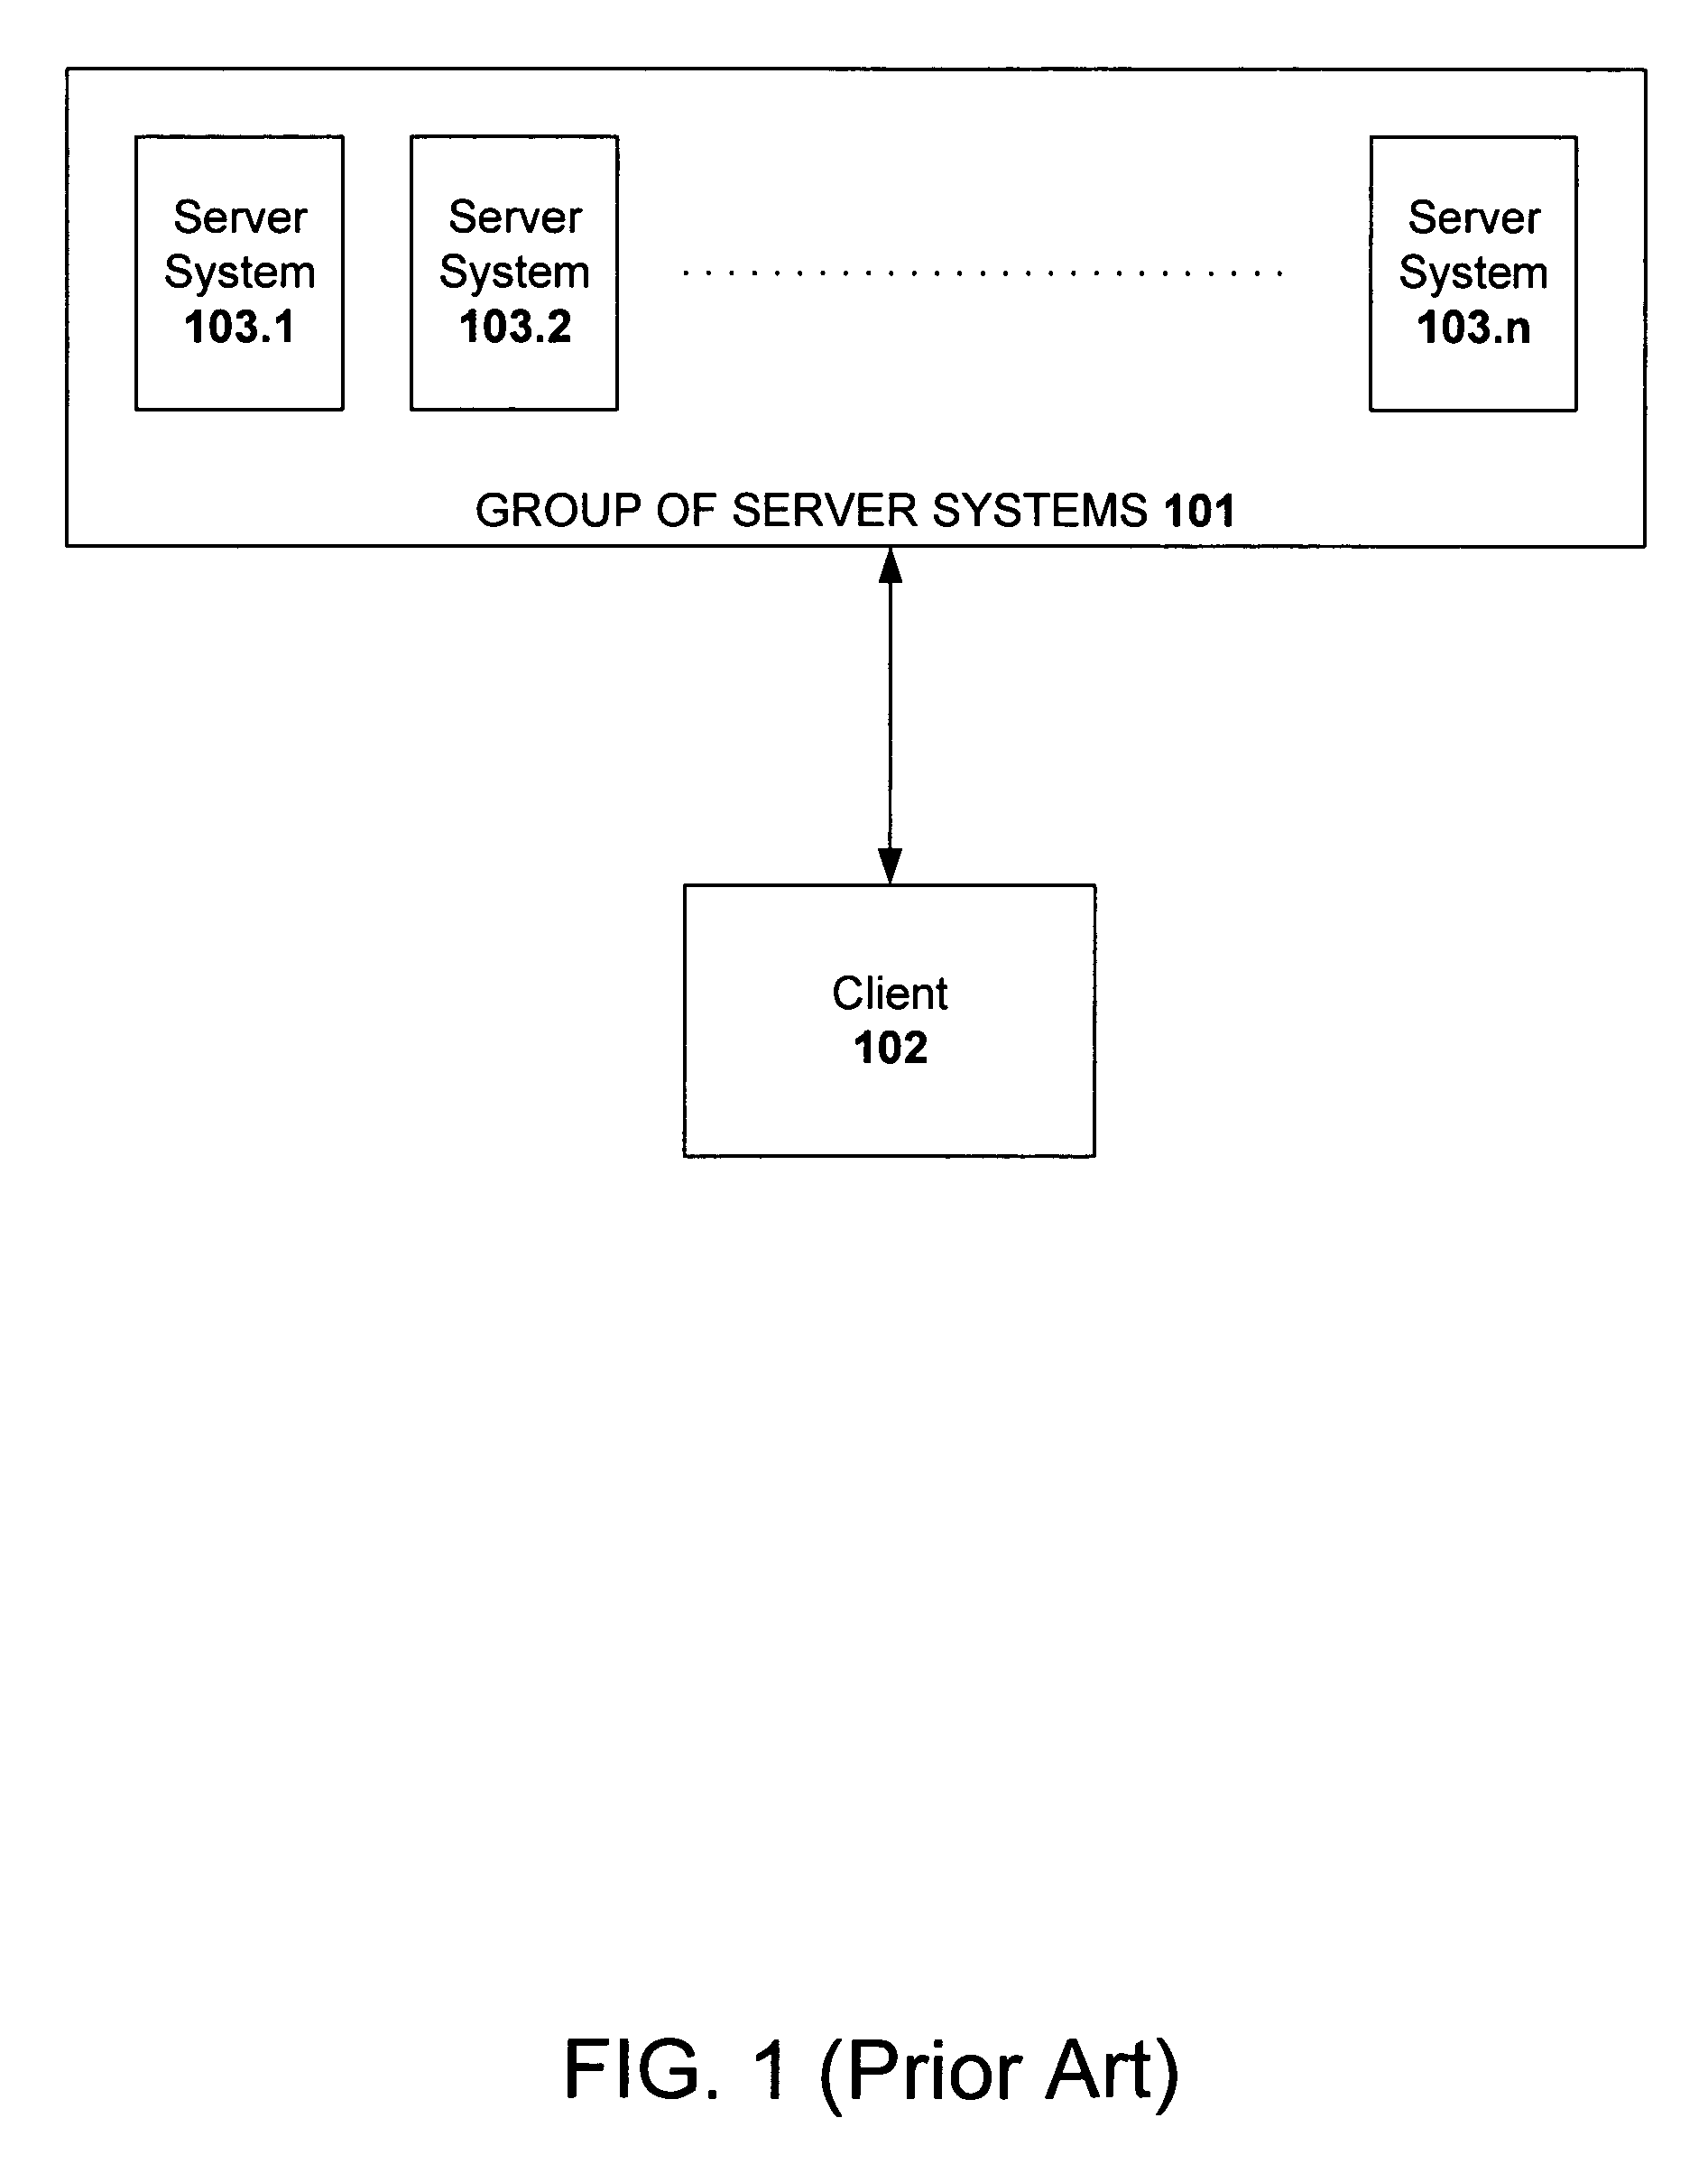 Method and system of subsetting a cluster of servers